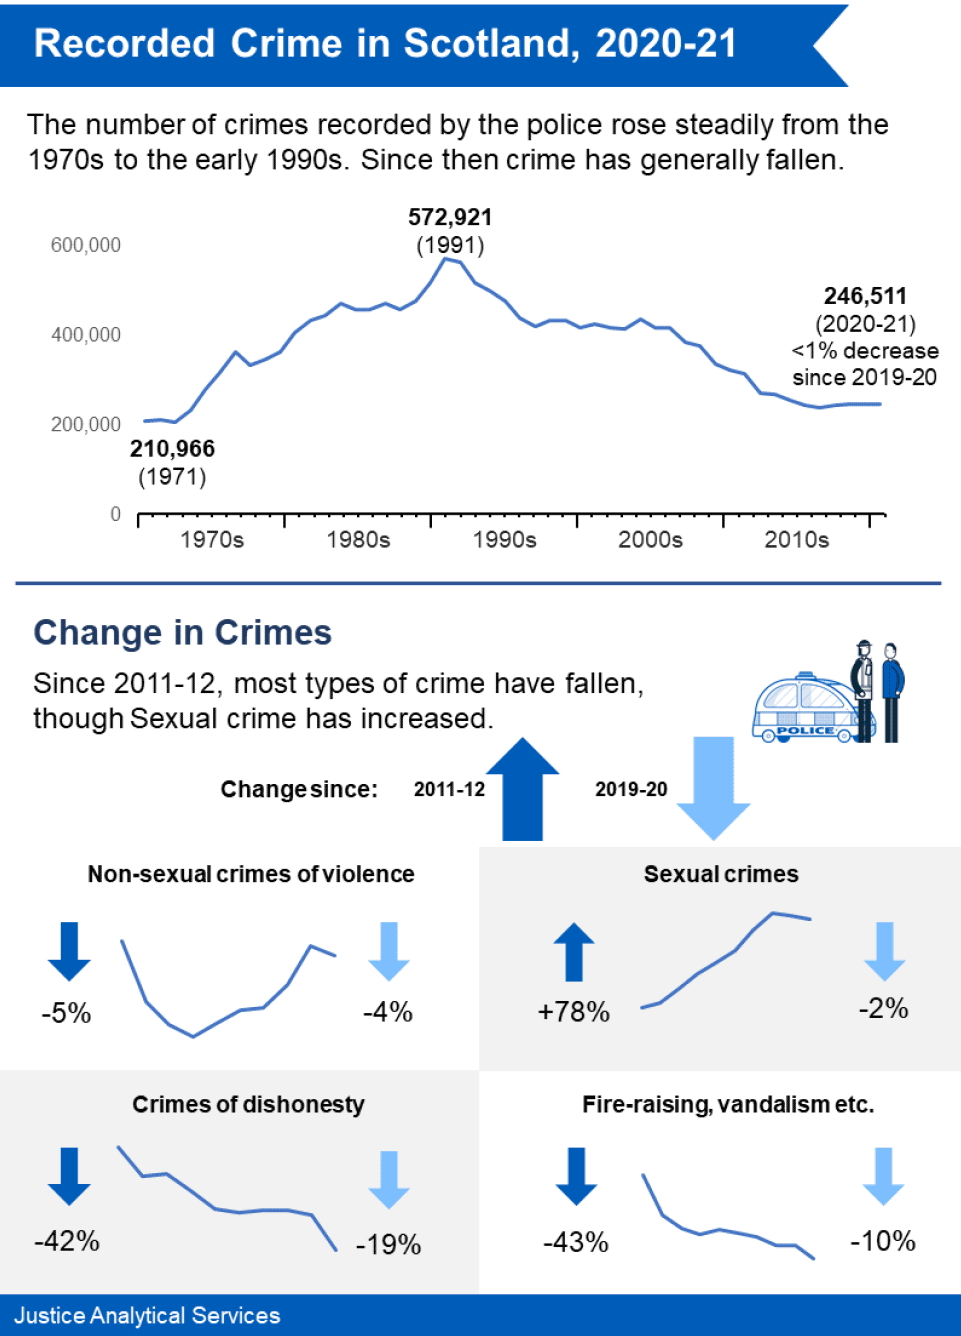 Infographic summarising recorded crime in Scotland. The top panel shows the number of crimes recorded by the police rose steadily from the 1970s to the early 1990s. Since then crime has generally fallen. The bottom panel shows changes in recorded crimes since 2011-12. Most types of recorded crime have fallen, though Sexual crime has increased.